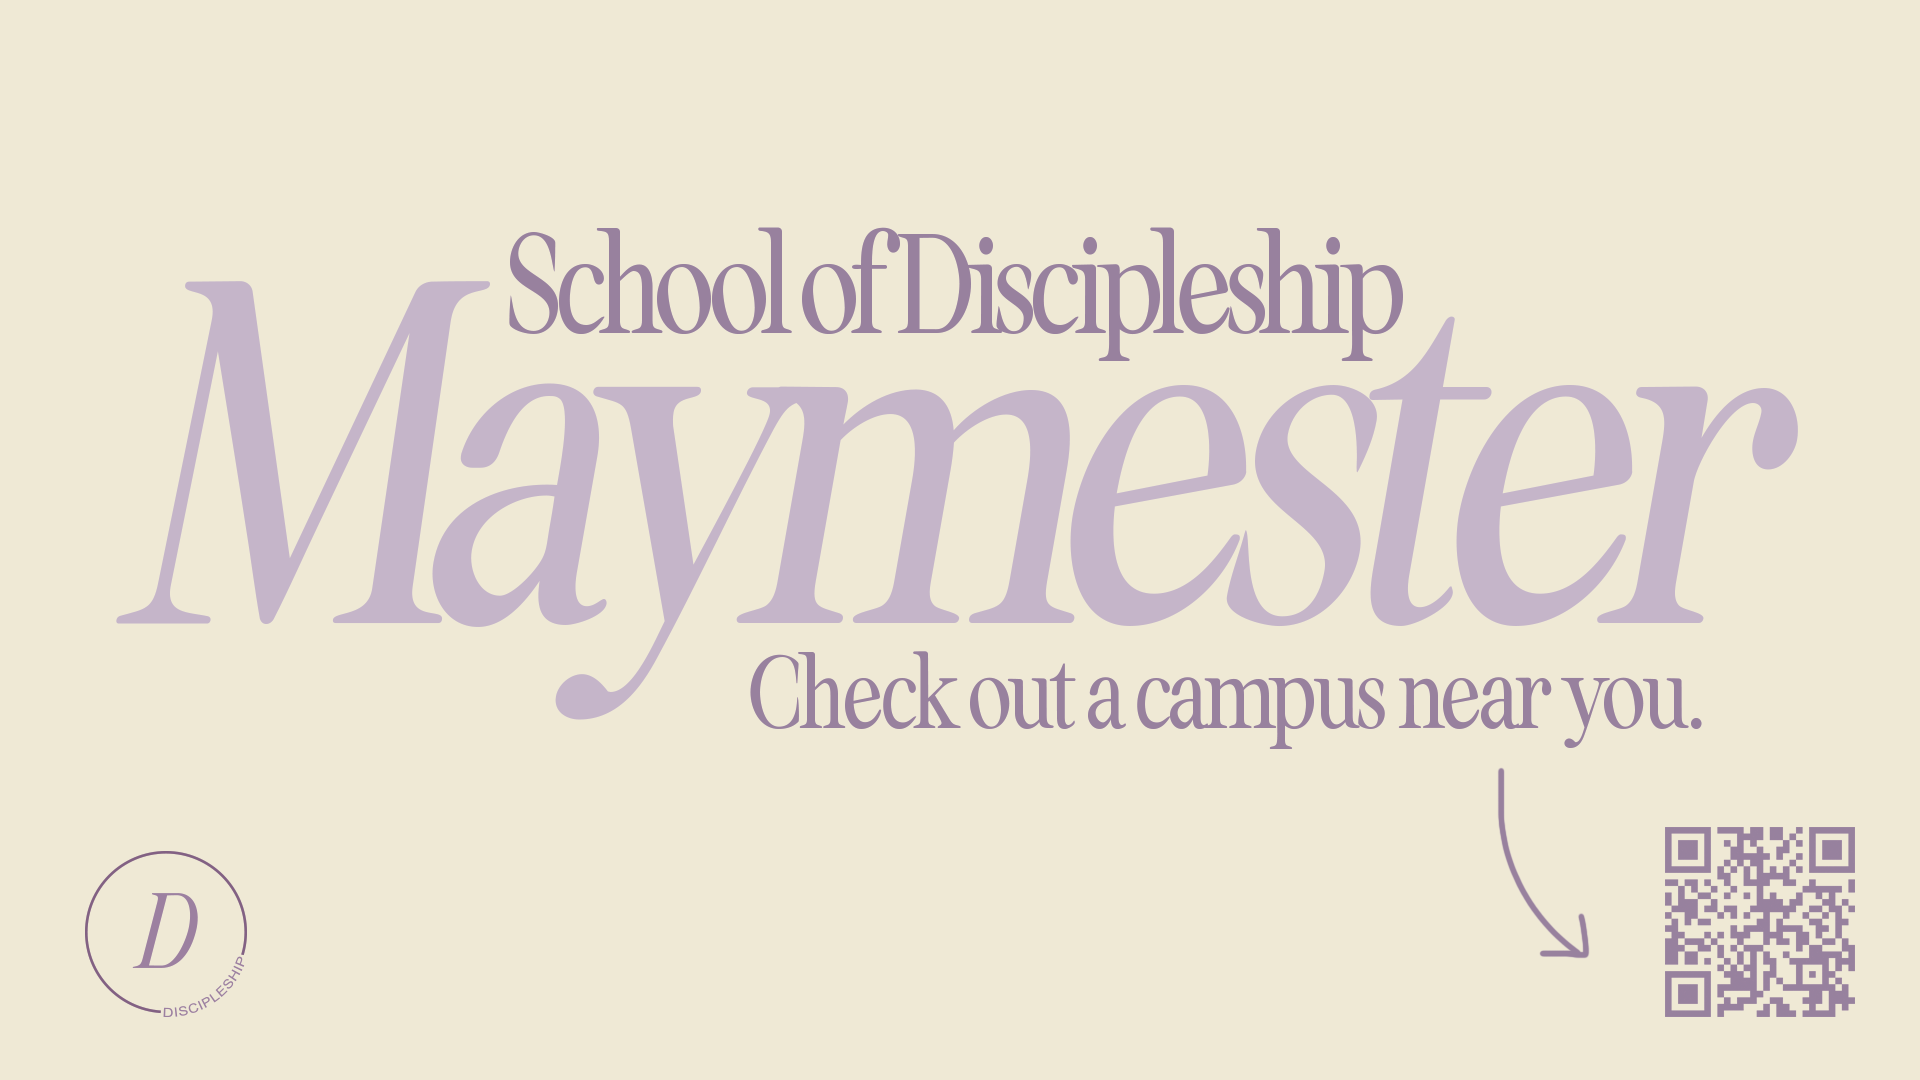 MayMester at the Spartanburg campus